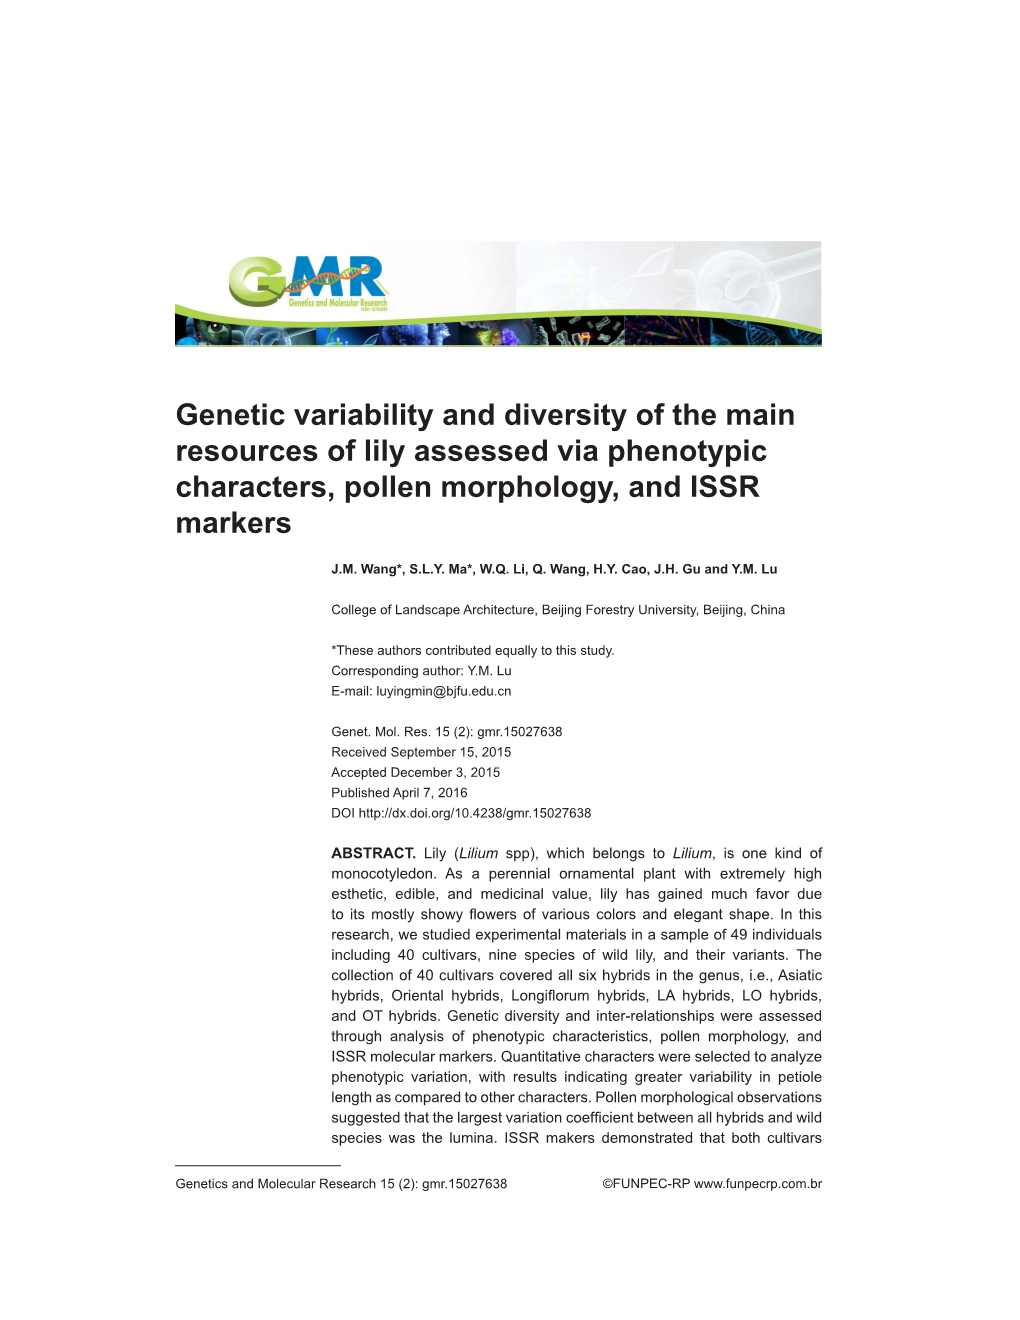 Genetic Variability and Diversity of the Main Resources of Lily Assessed Via Phenotypic Characters, Pollen Morphology, and ISSR Markers